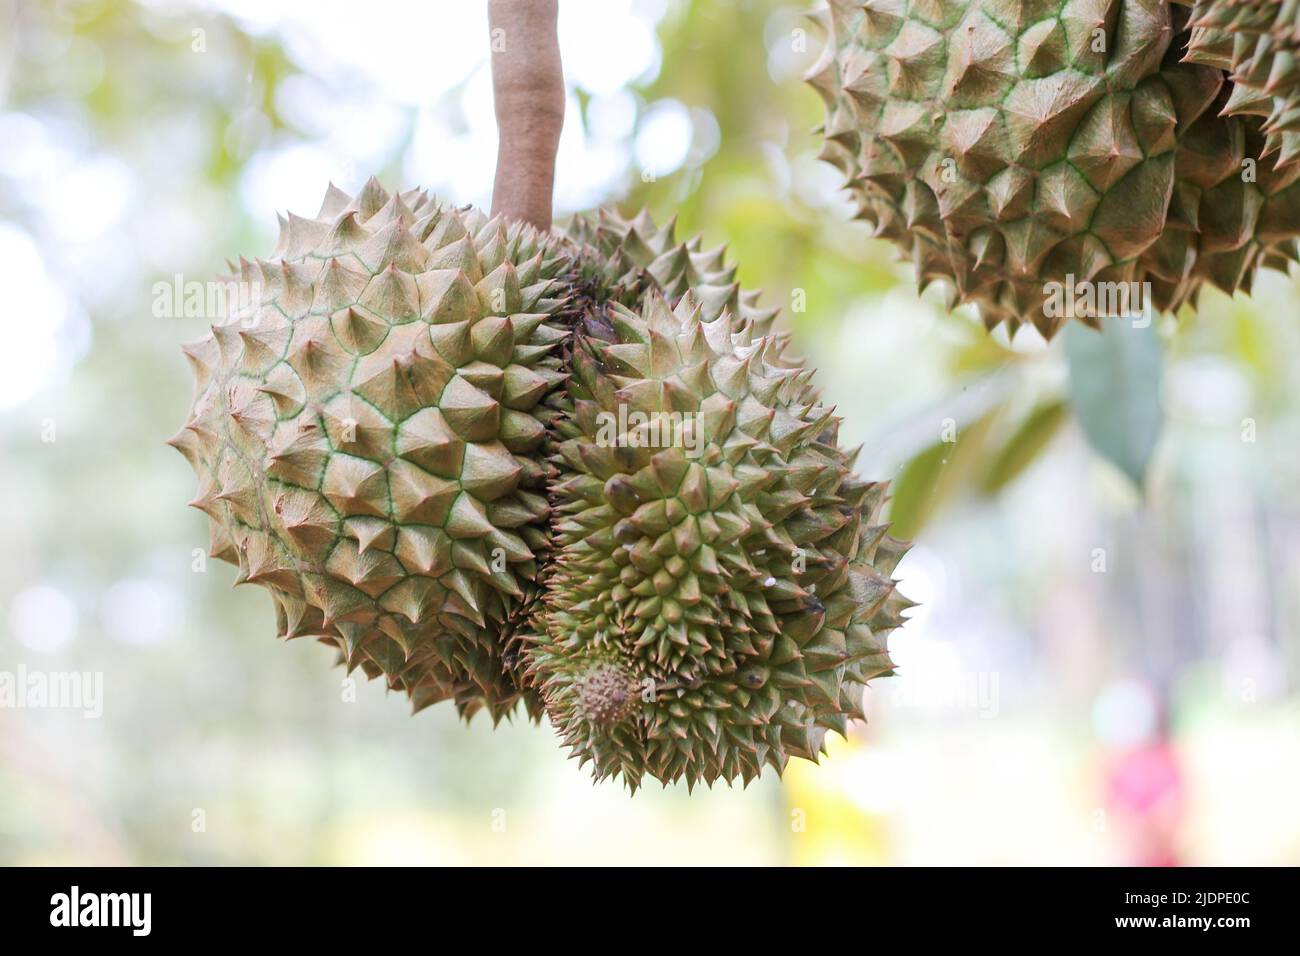 Durian from Sisaket,Thailand has a unique flavor because it is grown on soil rich in potassium from a volcanic eruption. 'Volcano Durian' Stock Photo